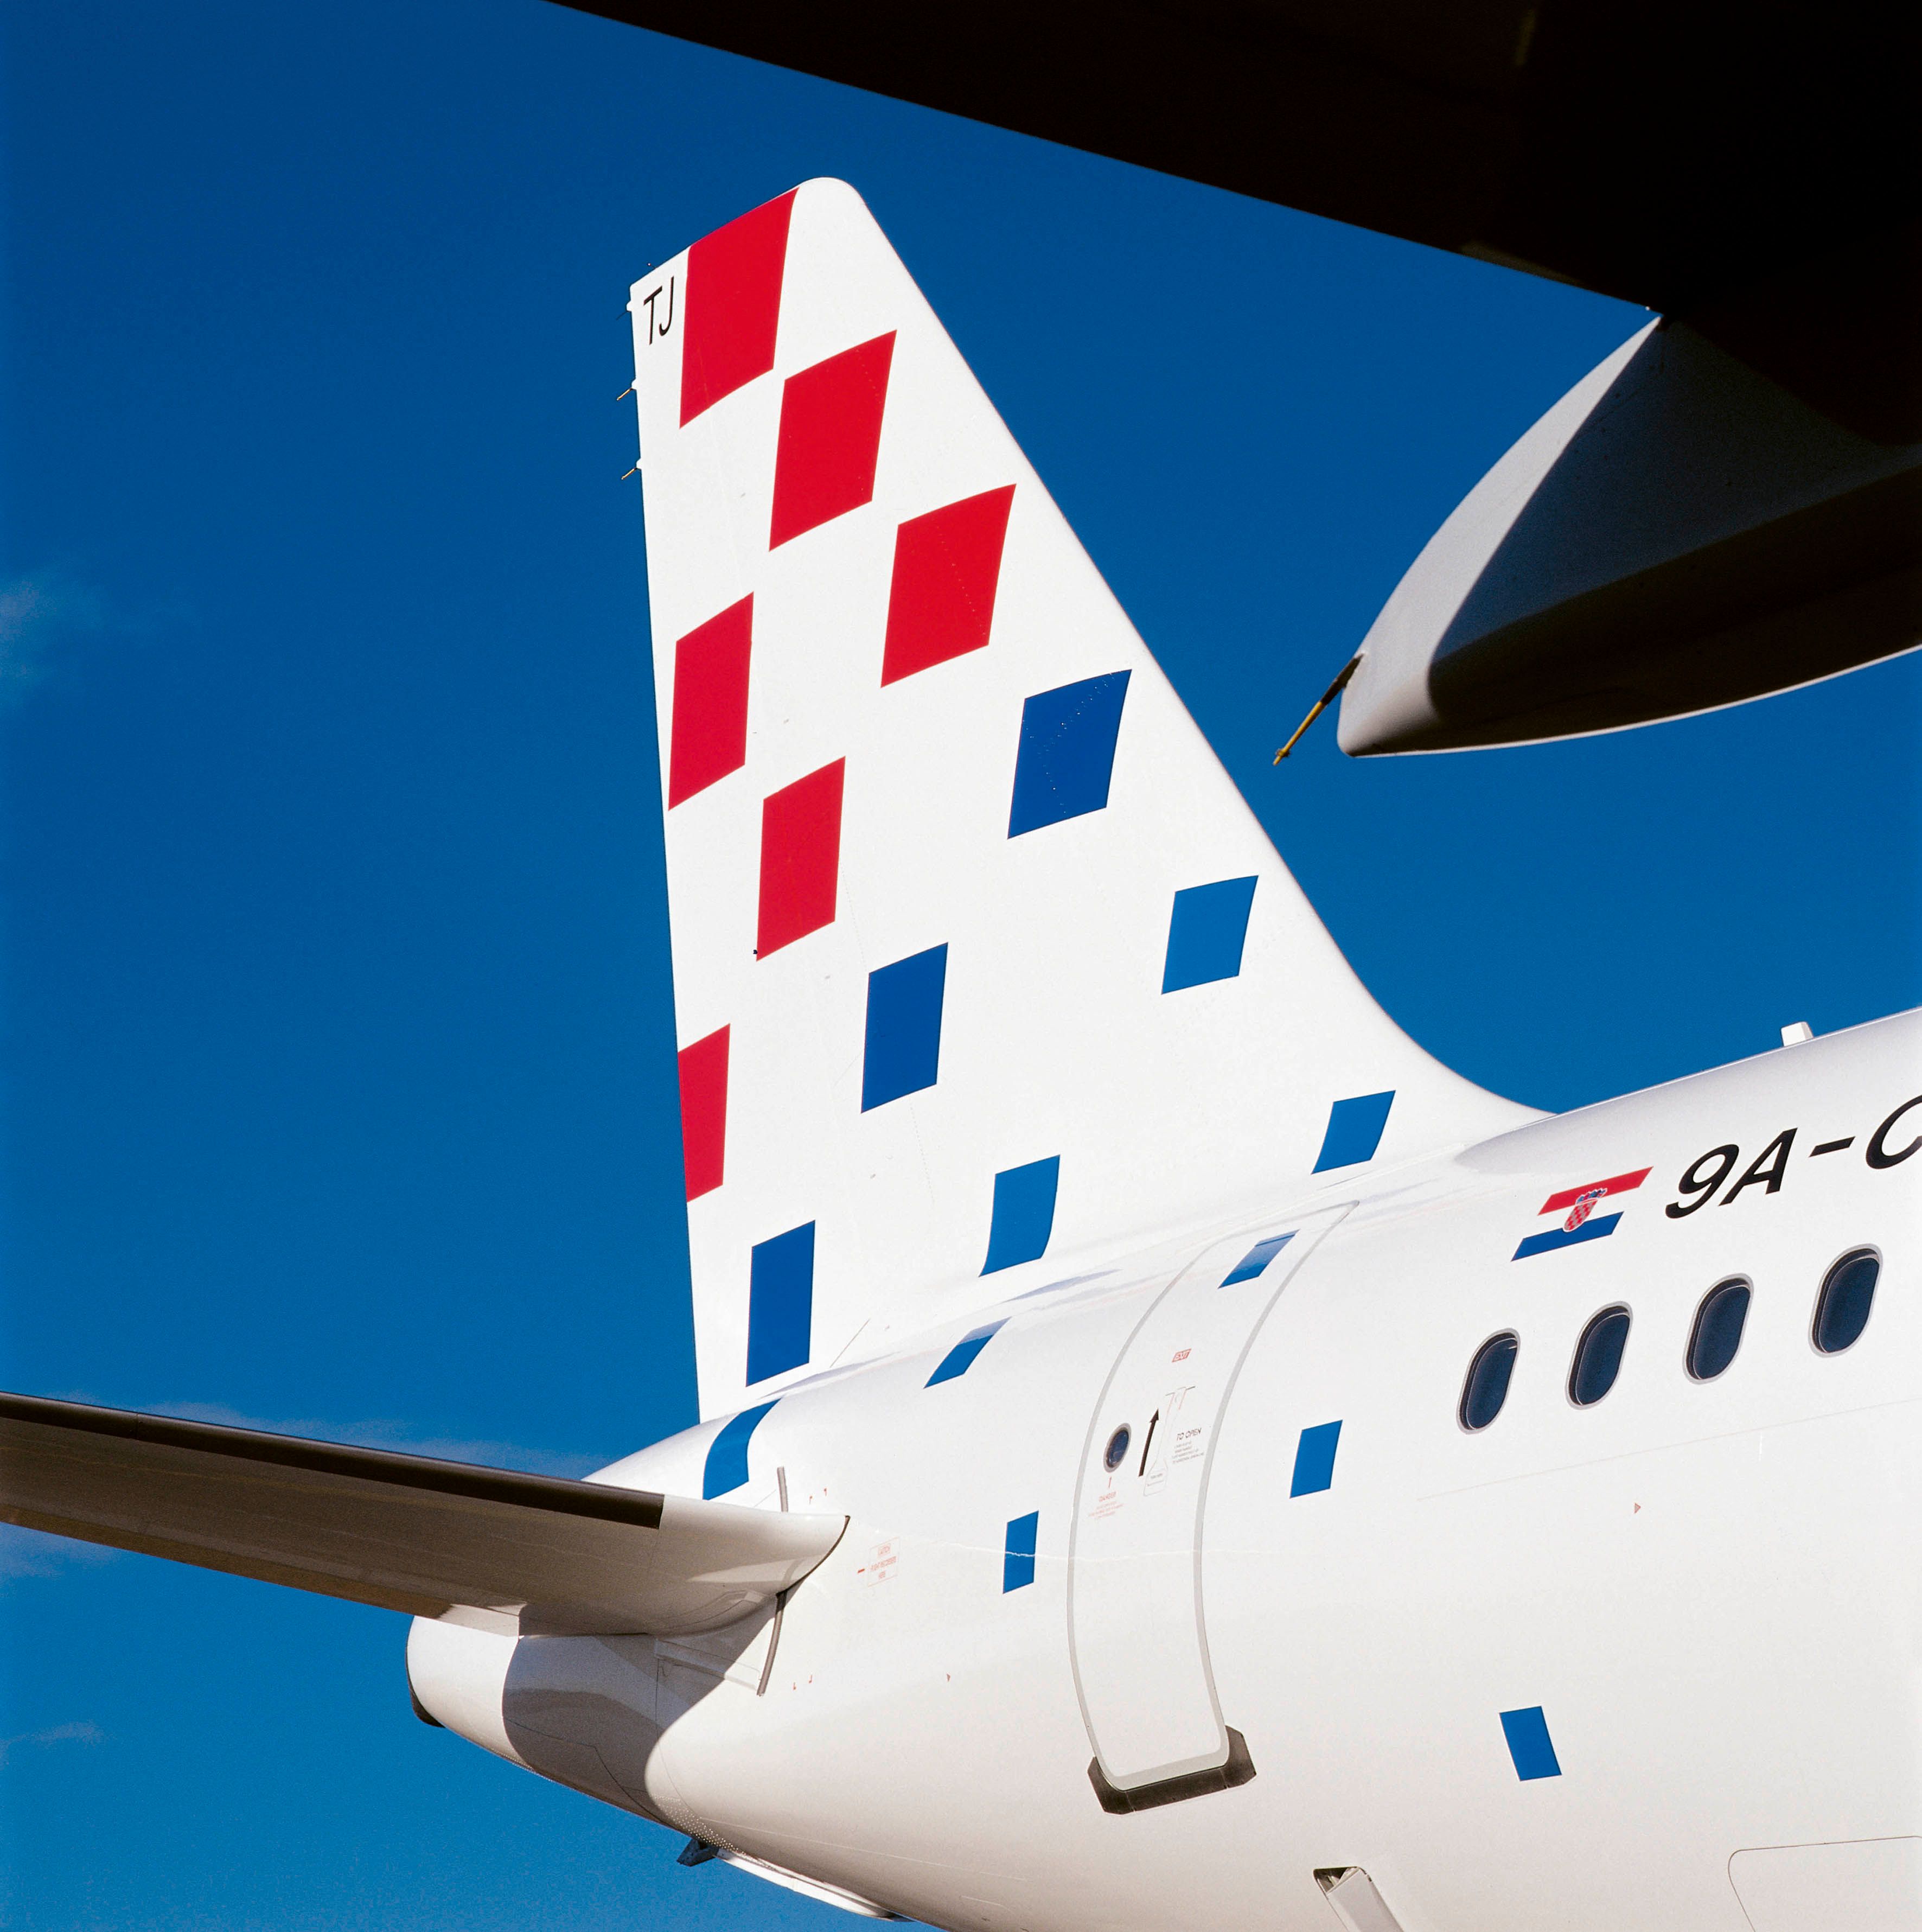 A closeup of the tail of a Croatia Airlines aircraft.